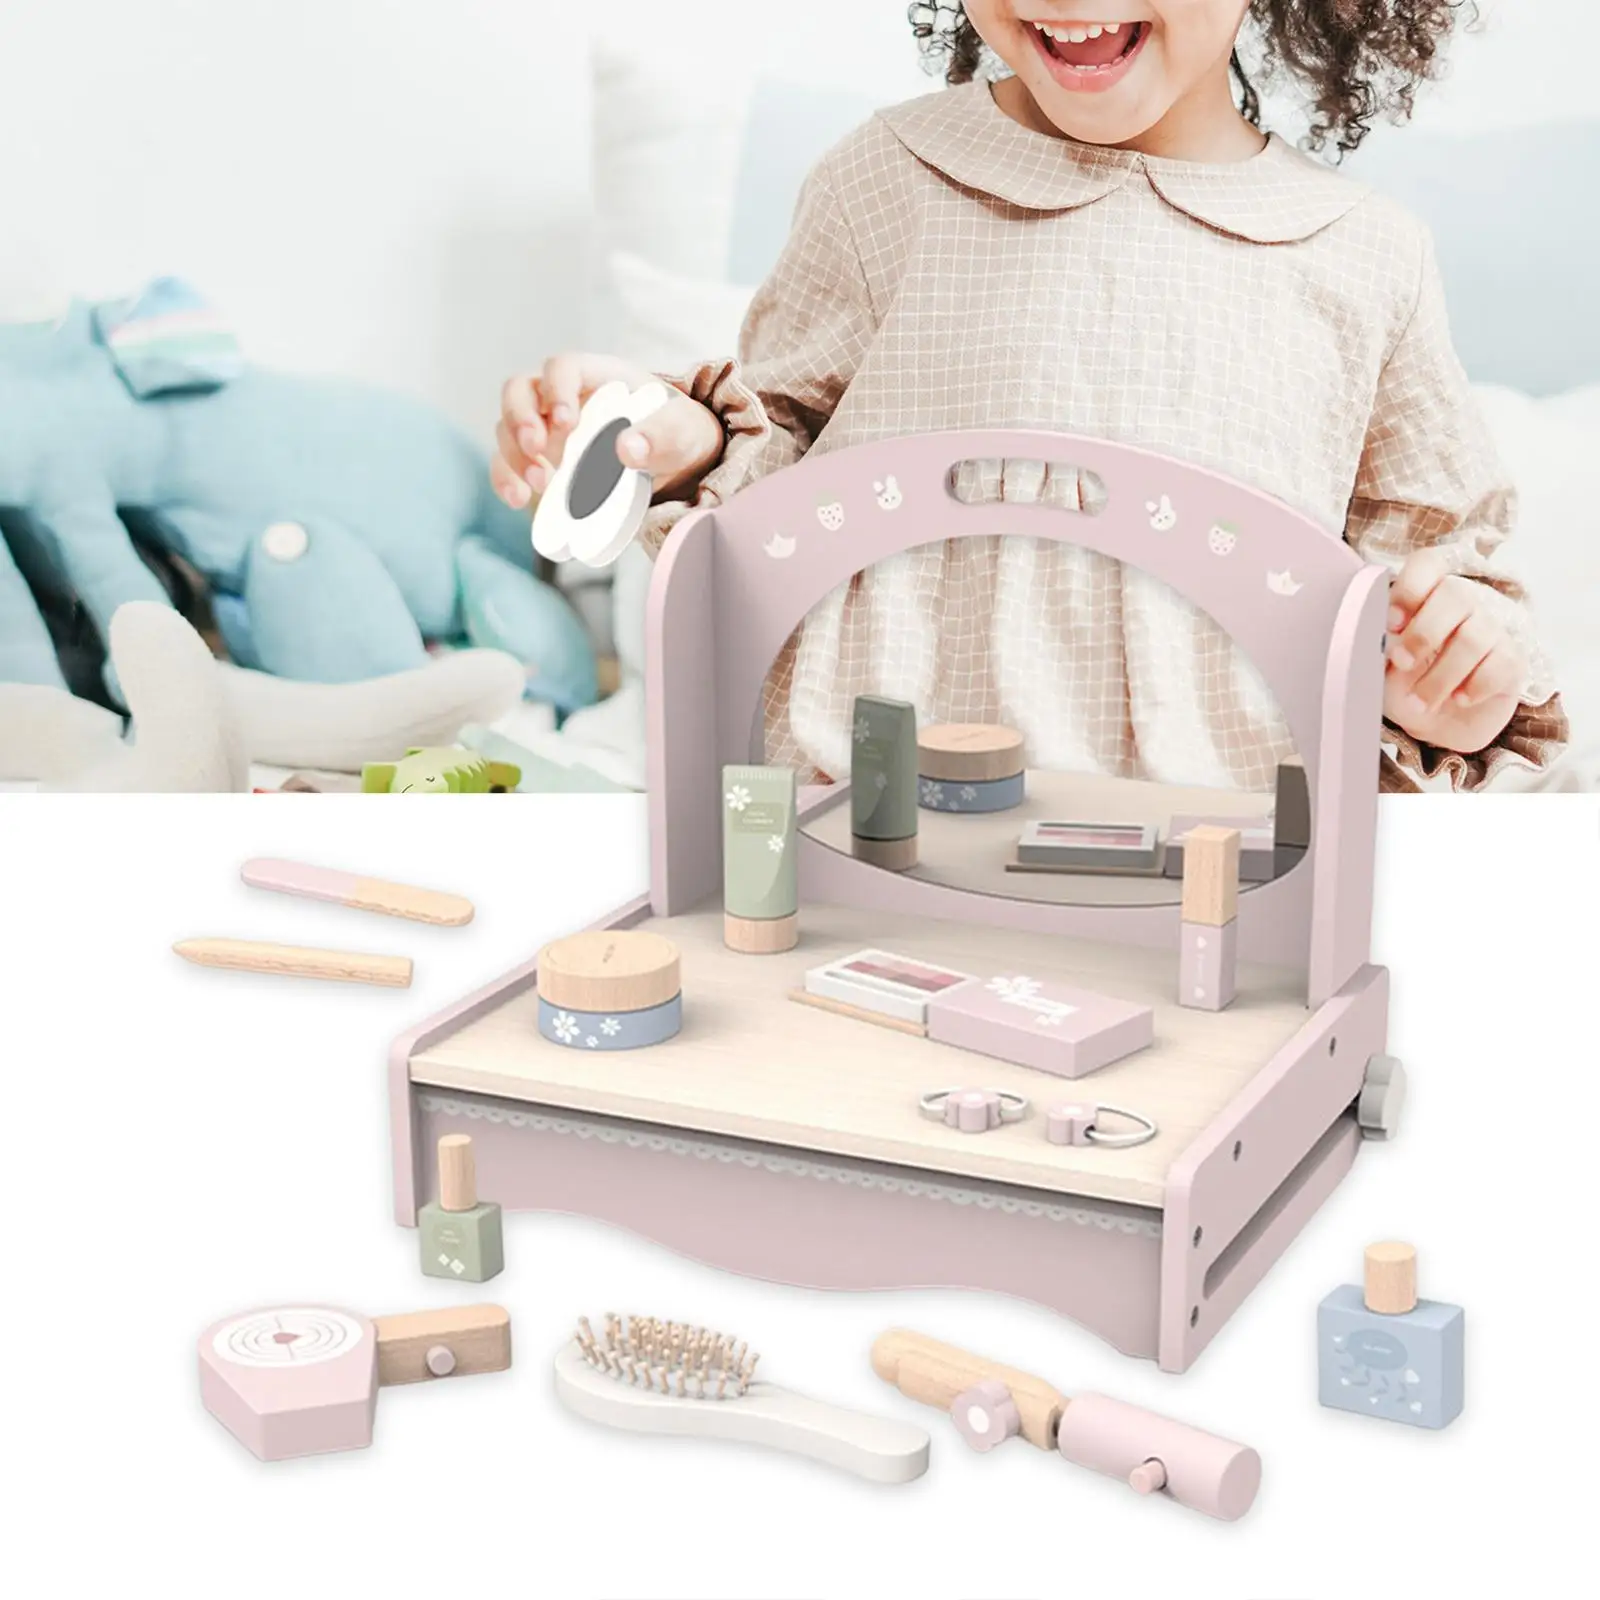 Dress Table Toy Simulation Play Room Kids Play Vanity Toy for Interaction